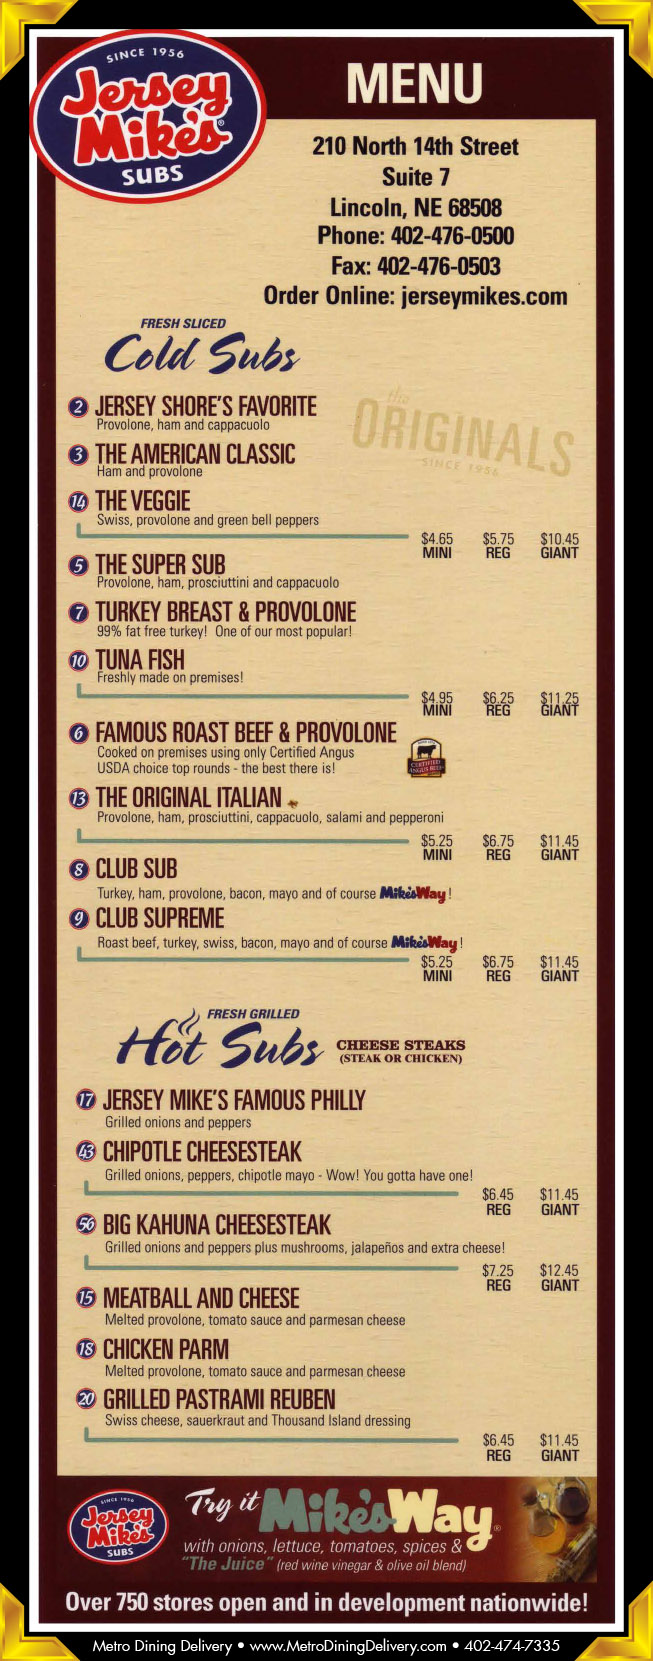 Jersey Mike's Subs Menu 4024760500 Lincoln NE Provided by Metro